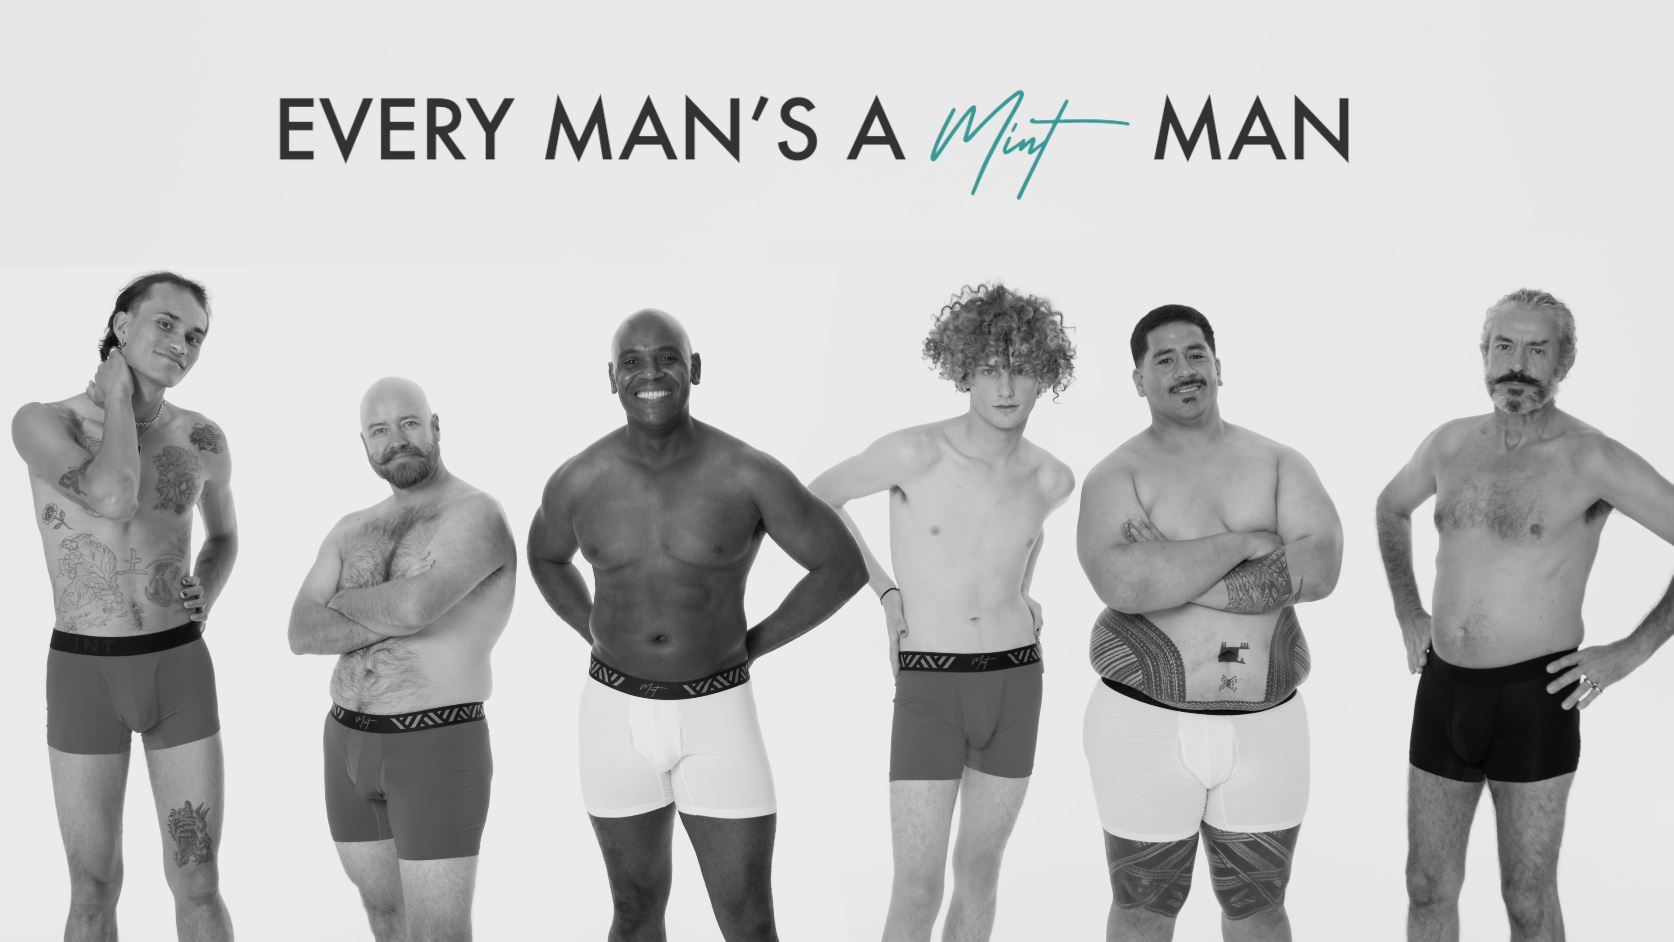 Jerome Kaino launched underwear brand Mint Wear with a body positivity campaign